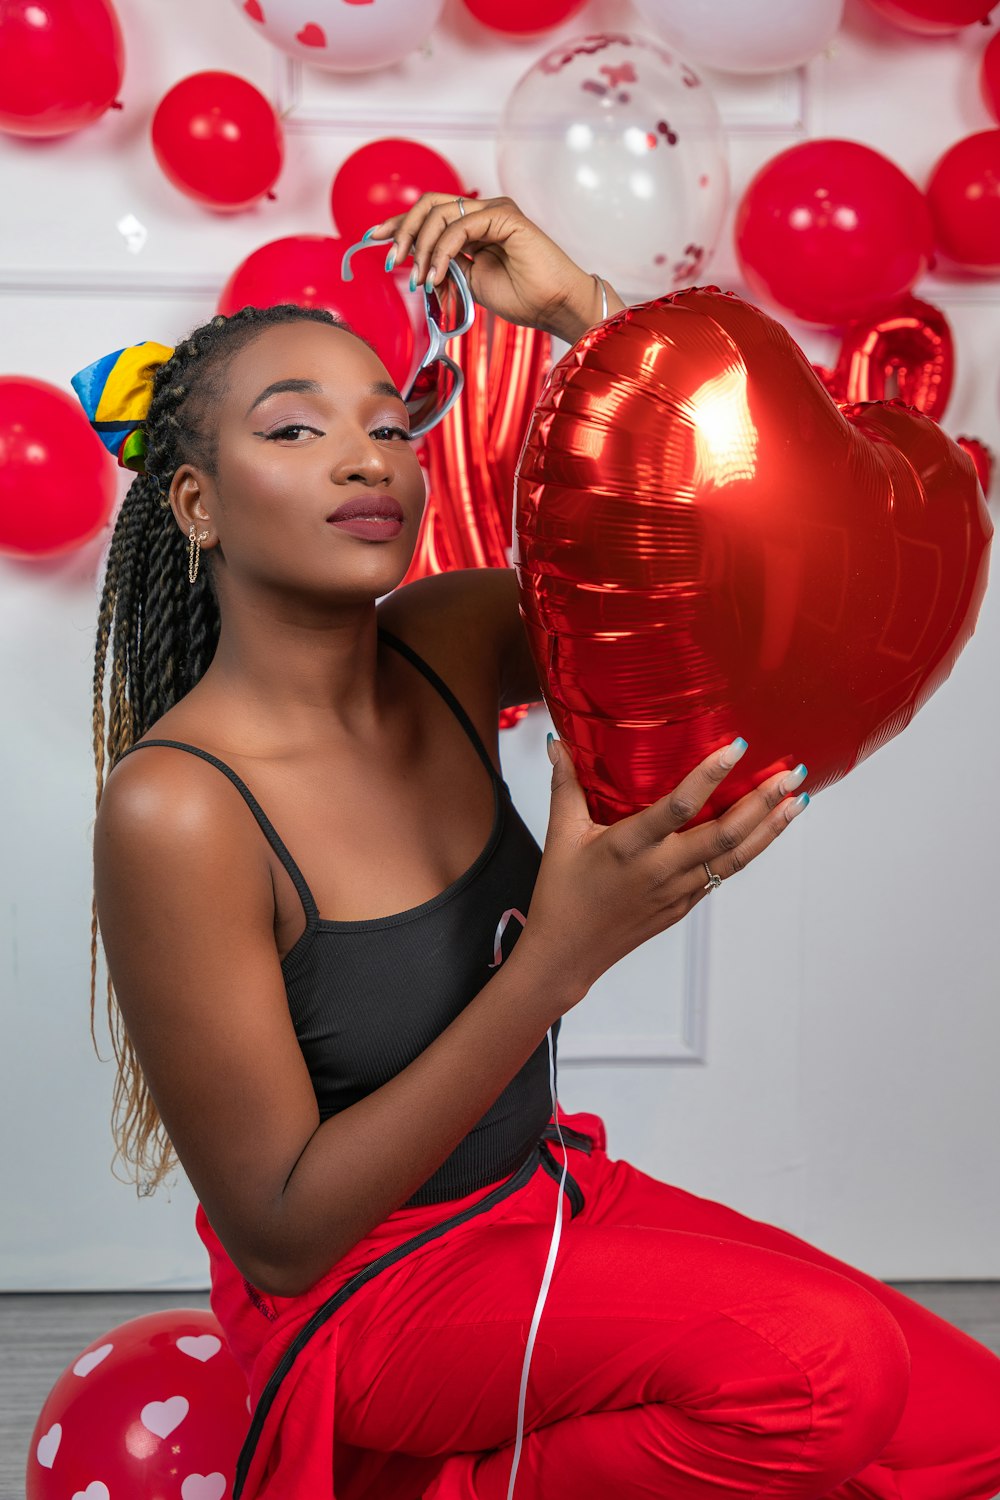 a woman holding a red heart shaped balloon